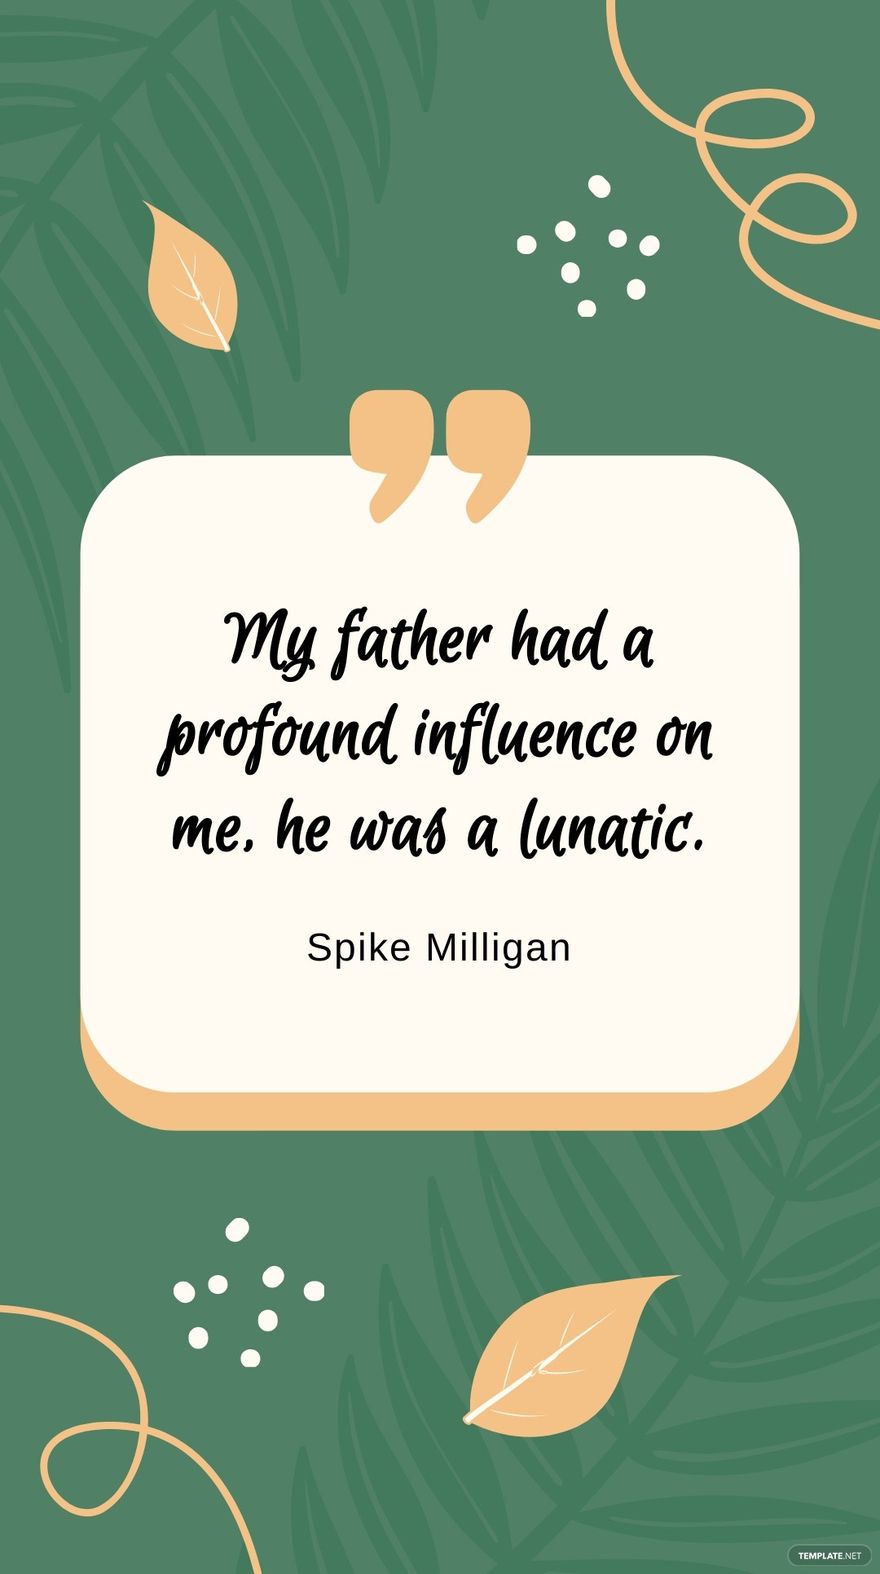 Spike Milligan - “My father had a profound influence on me, he was a lunatic.” 